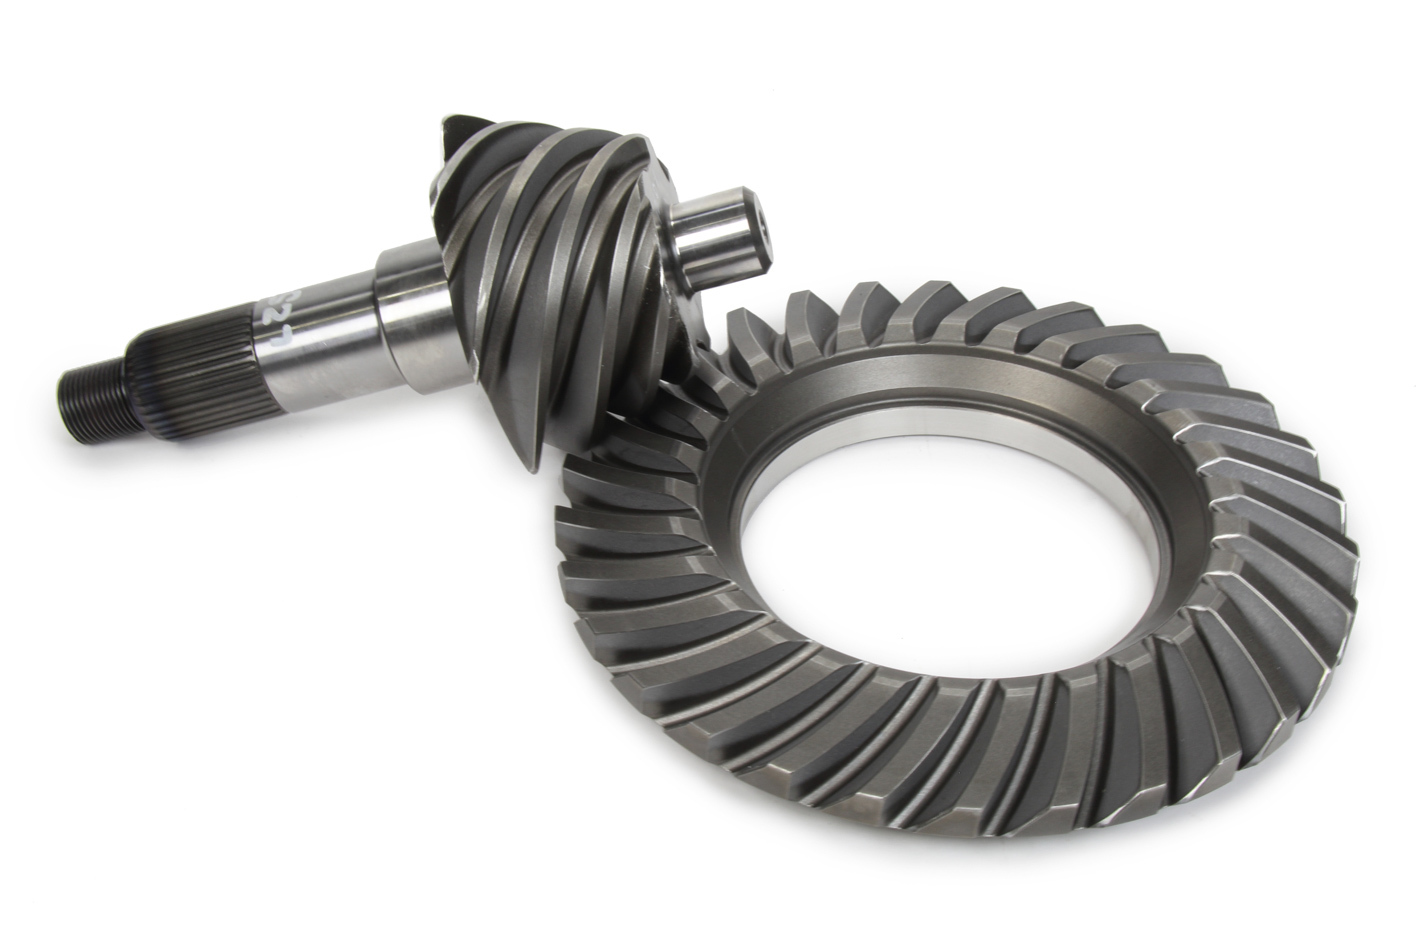 US GEAR Ring and Pinion, Pro HD, 4.29 Ratio, 35 Spline Pinion, 9.4",  Ford 10",  Kit